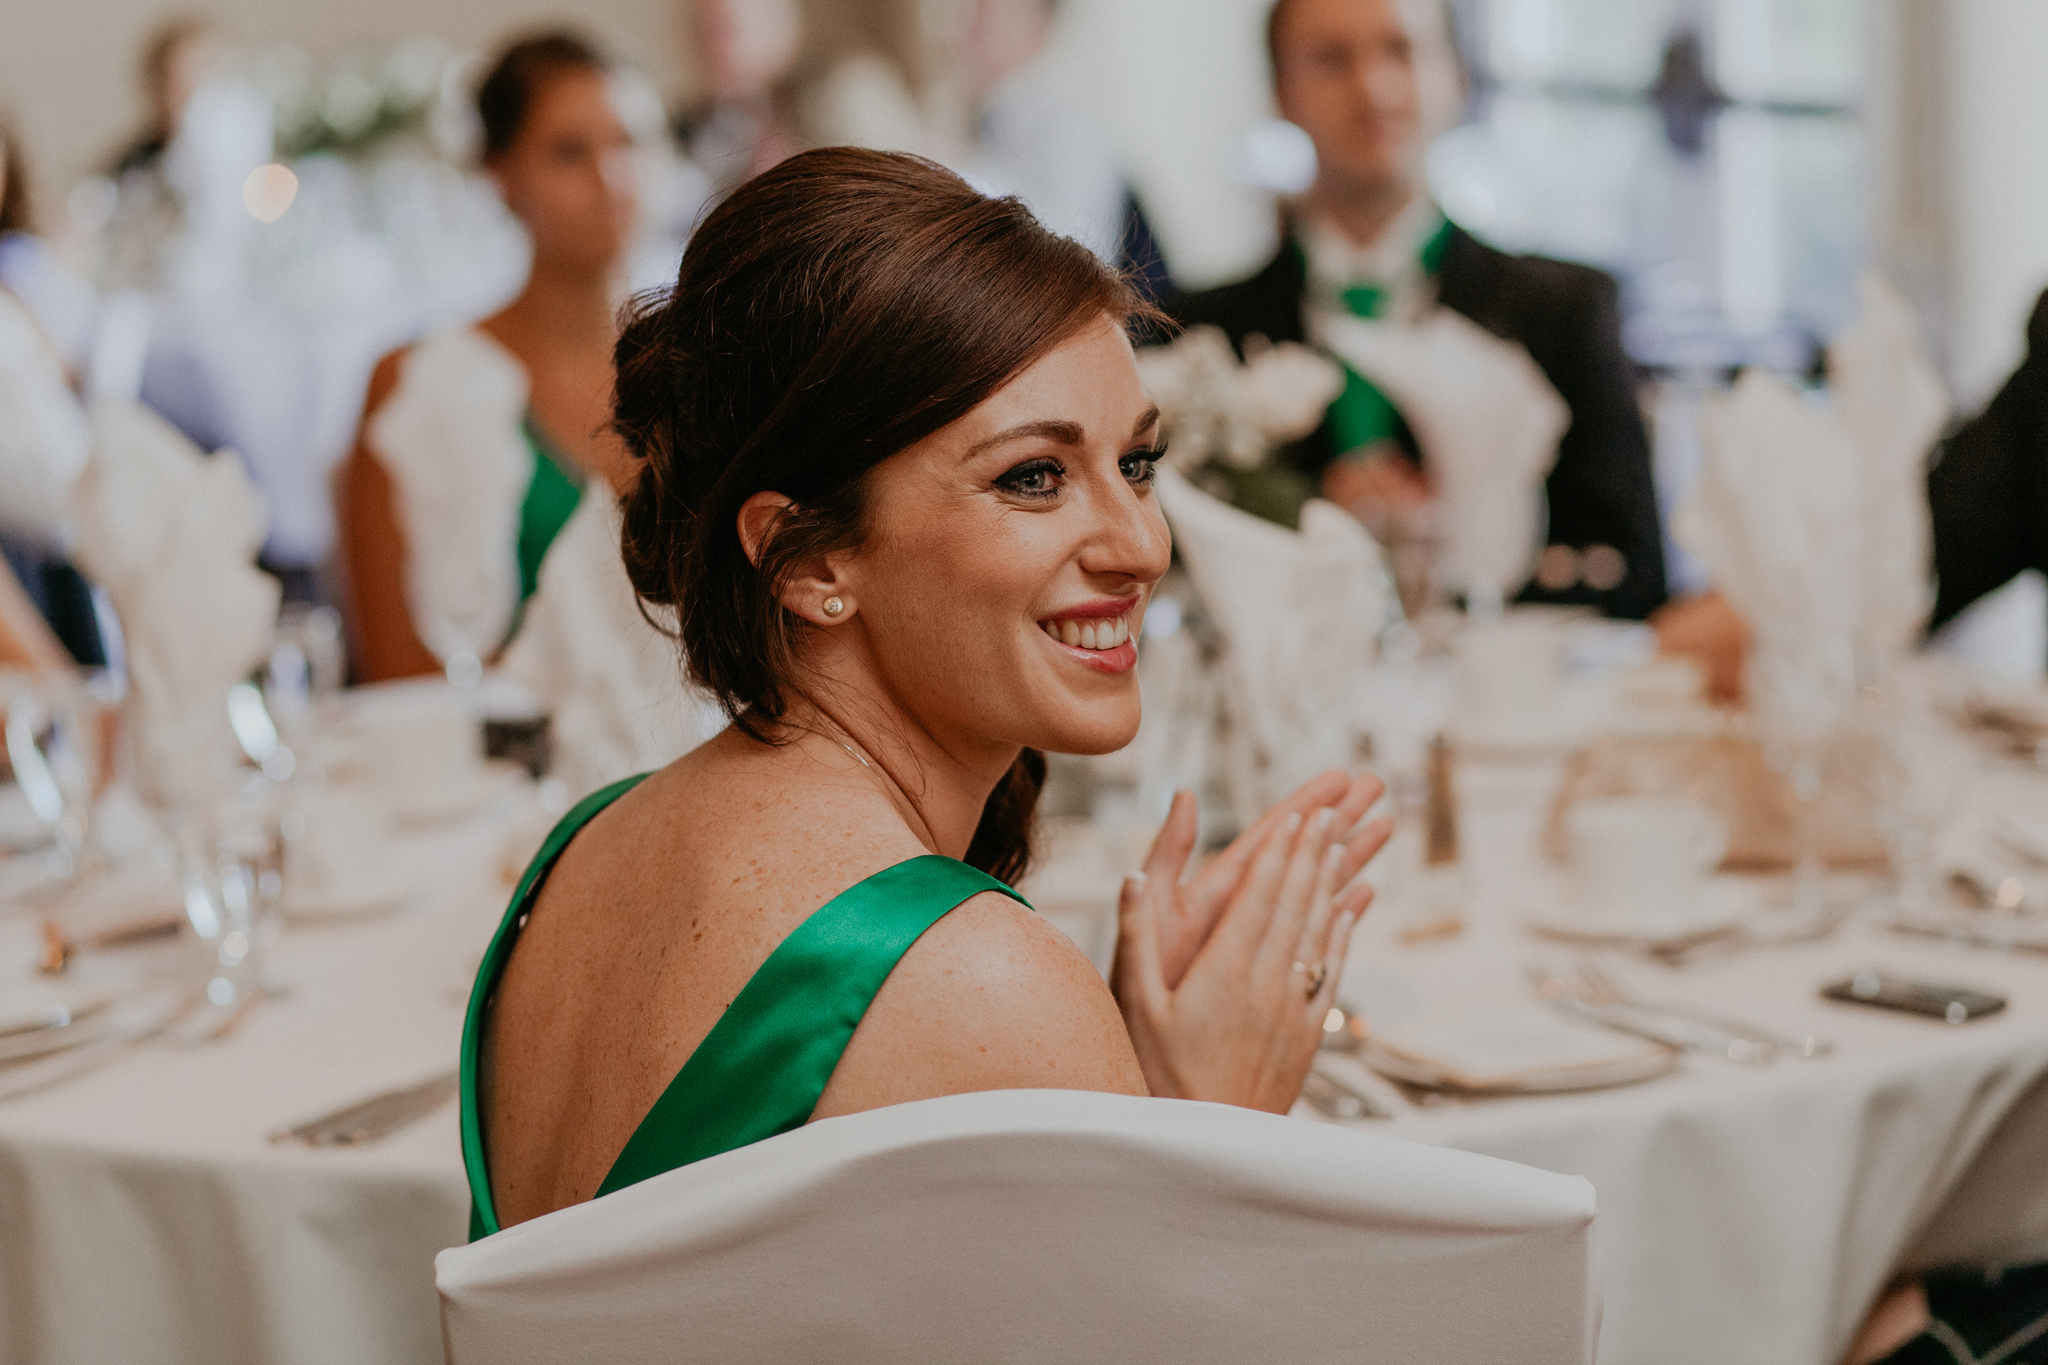 Bridesmaid in green dress smiles during reception documentary wedding photo